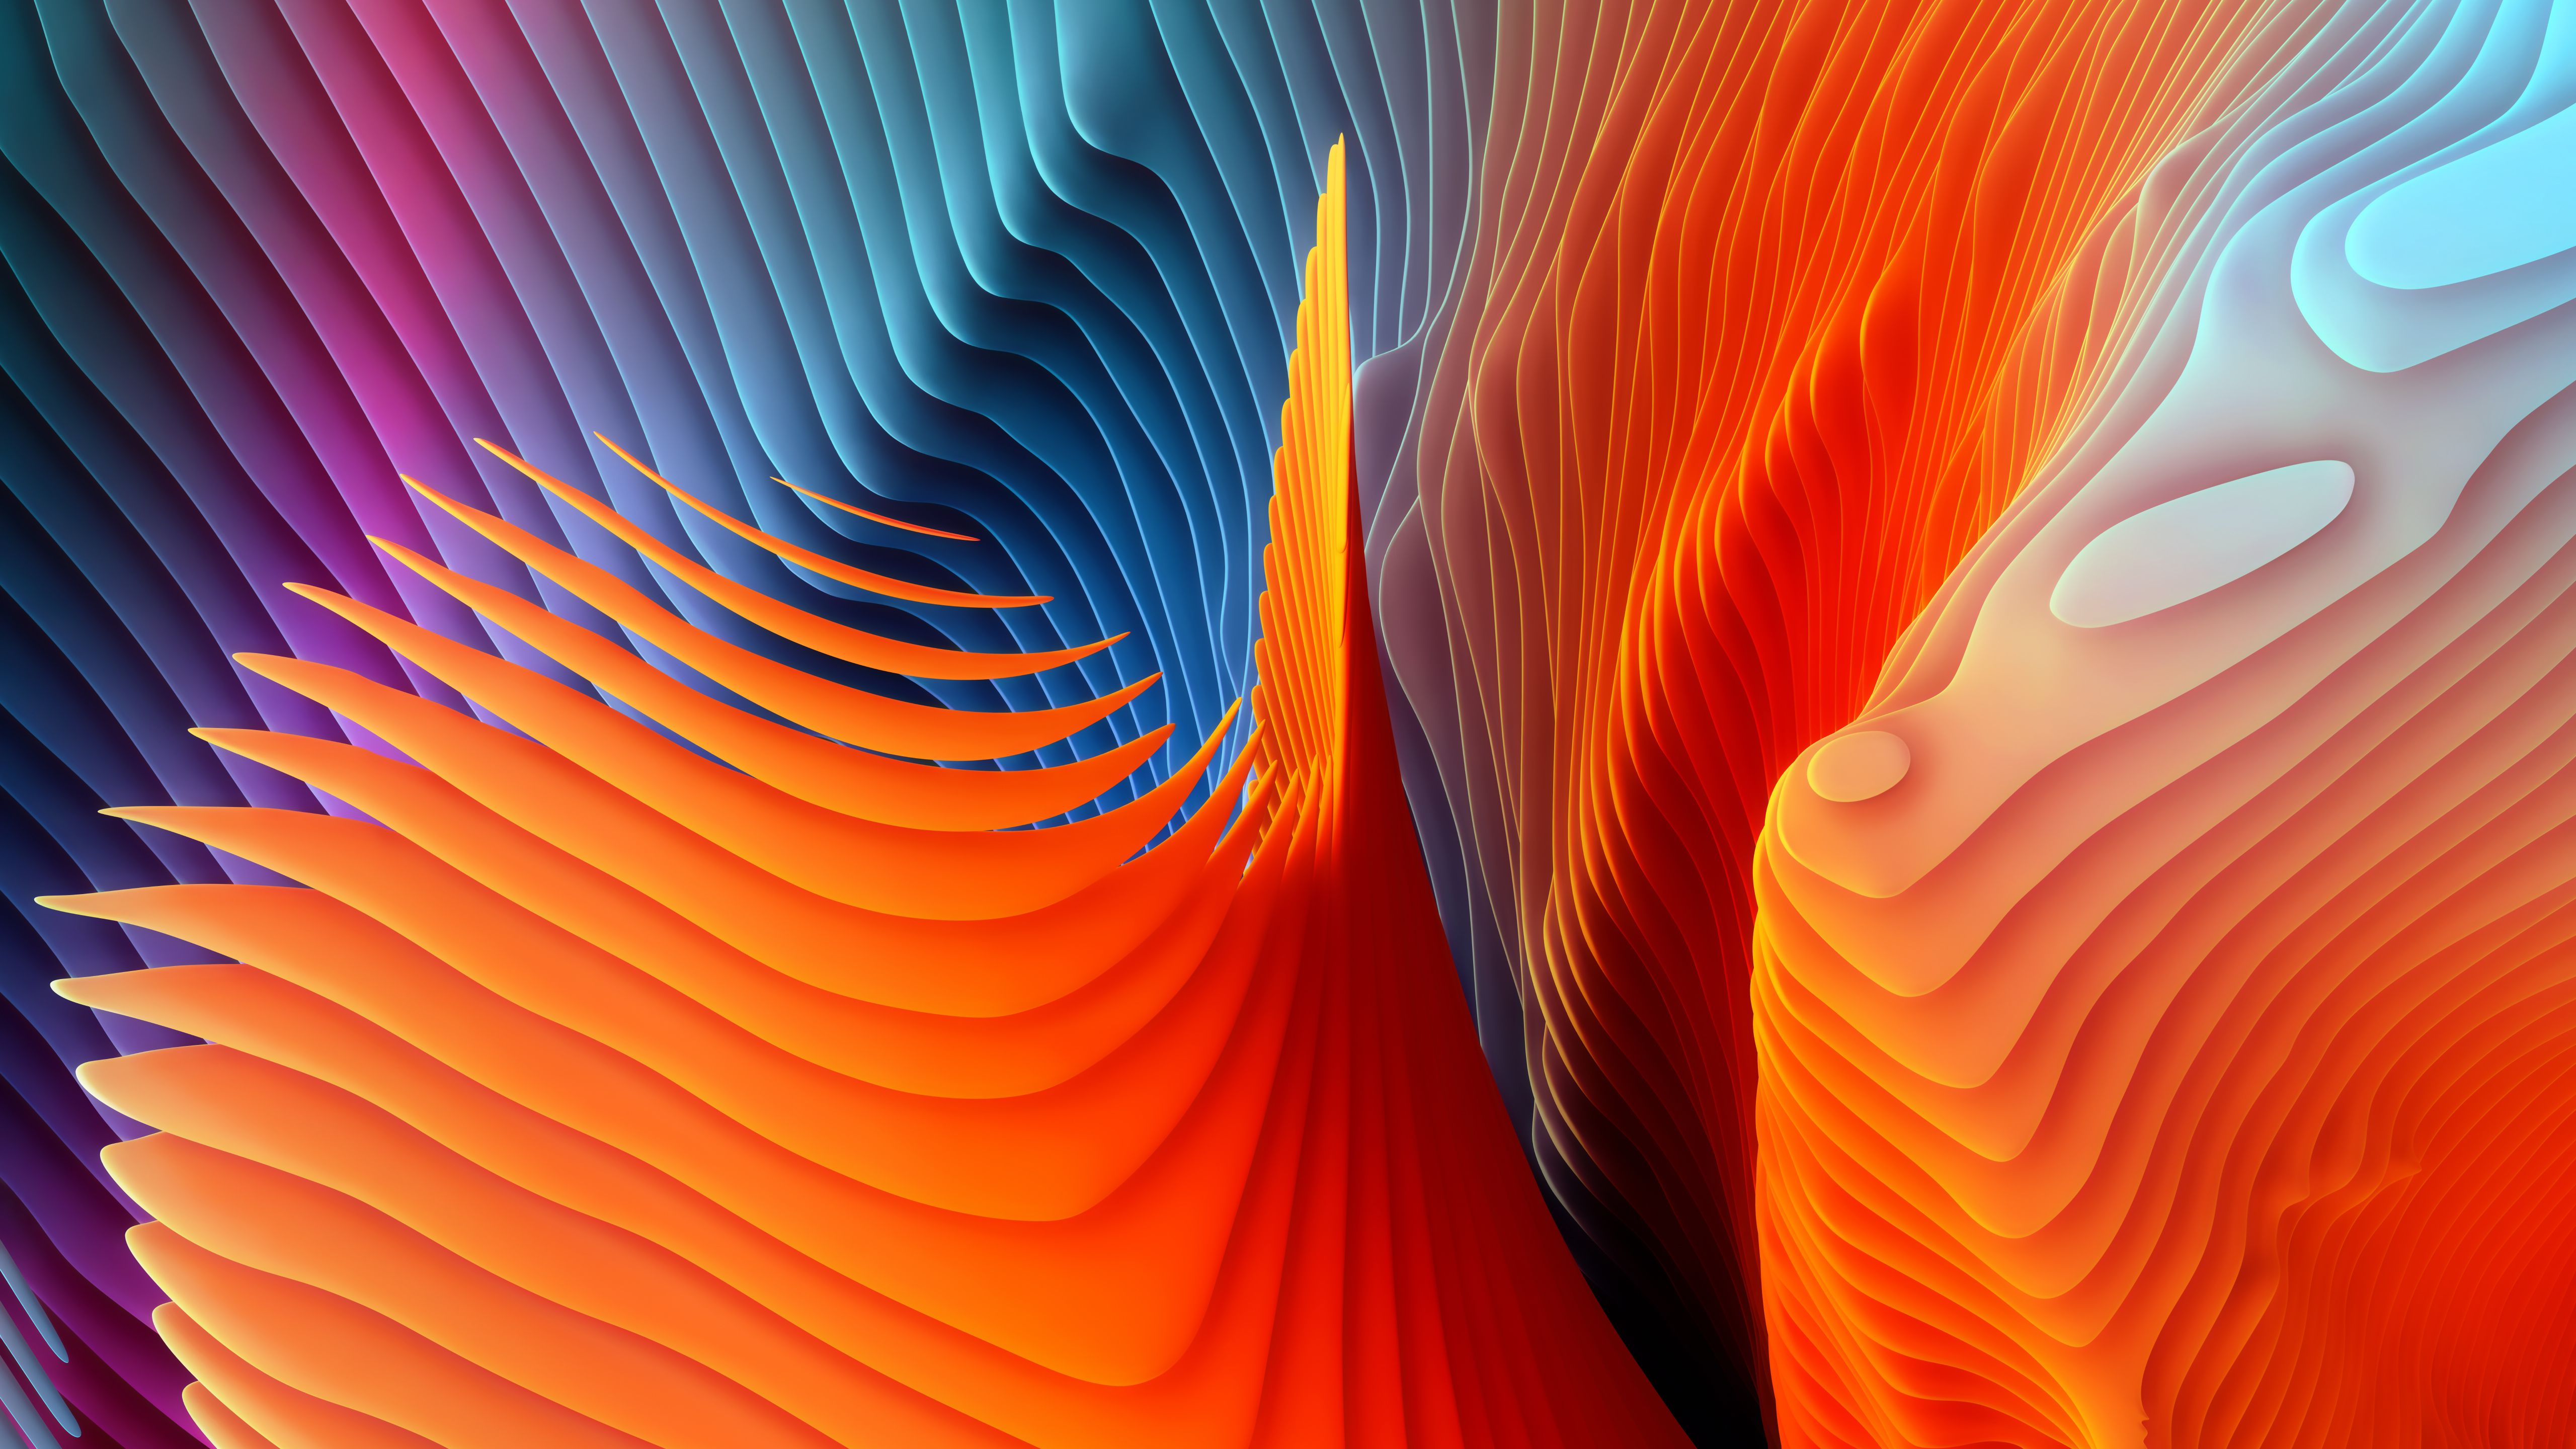 Digital Abstract Shapes 4K Cool 2021 Art Wallpapers